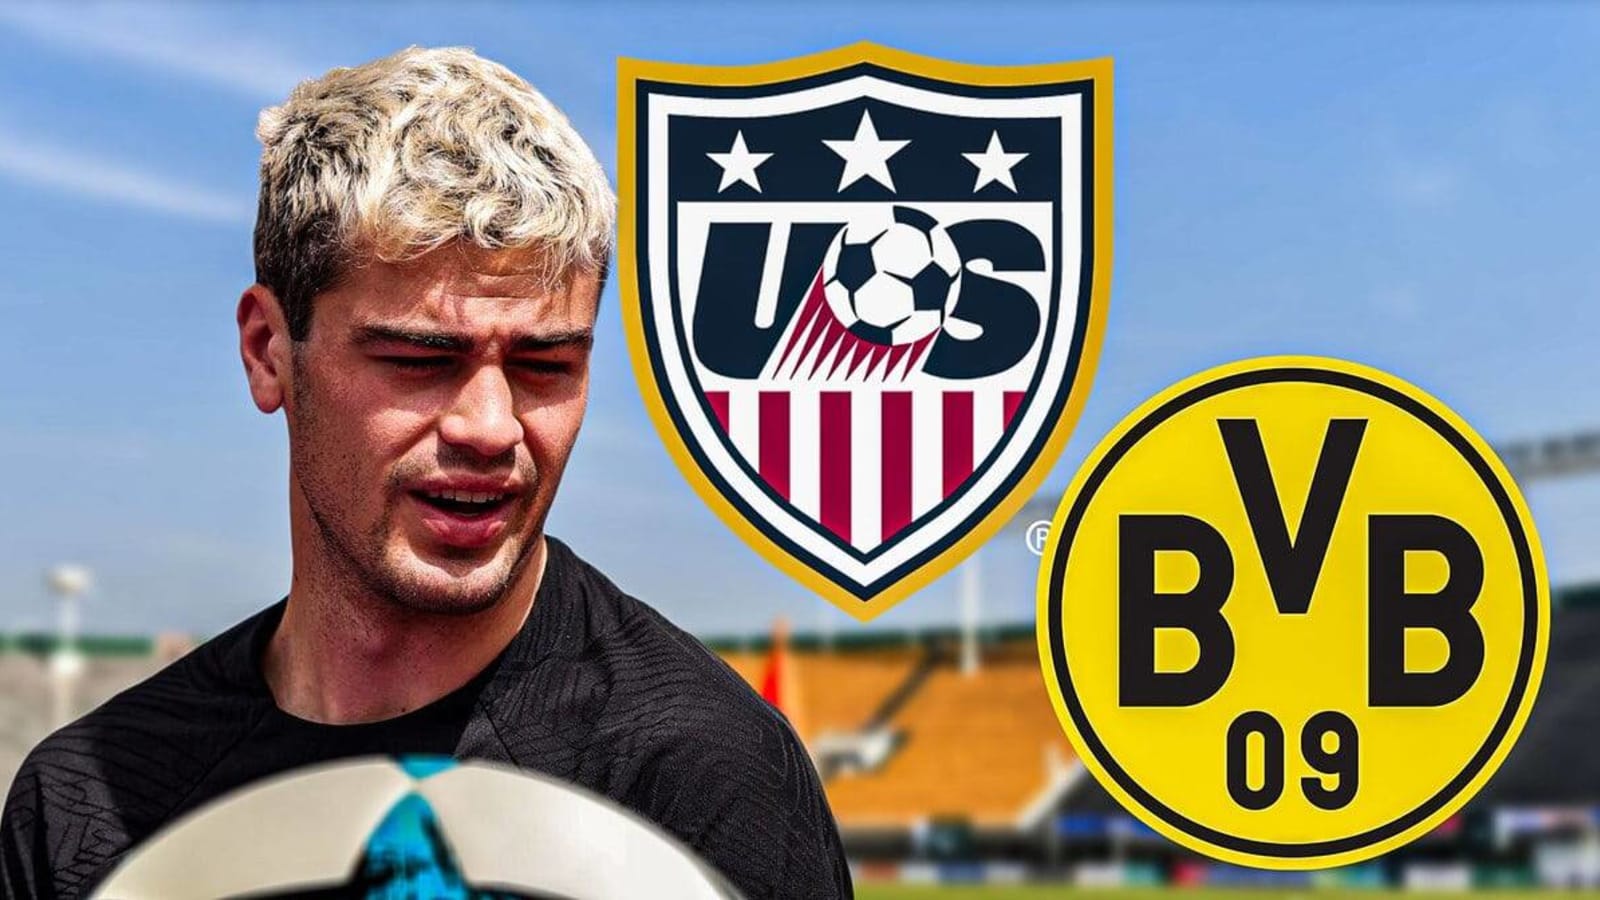 USMNT star Gio Reyna might have made his last appearance at Borussia Dortmund